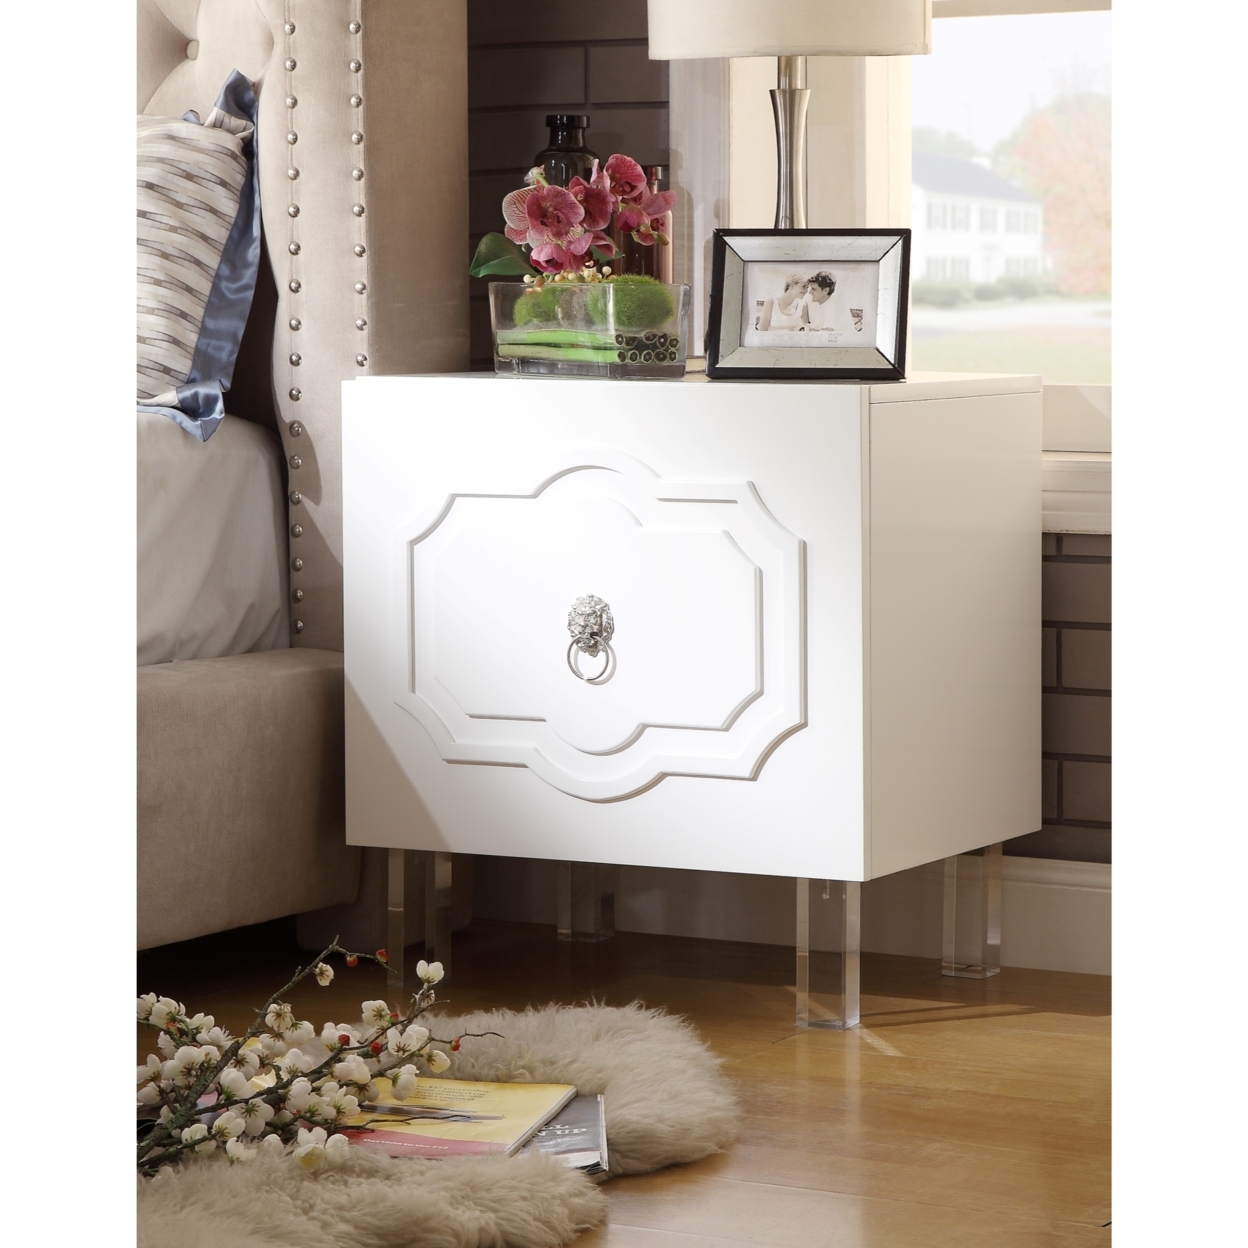 Anastasia Glossy Nightstand-Lacquer Finish-Side Table-Acrylic Lucite Legs-Modern & Functional By Inspired Home - White